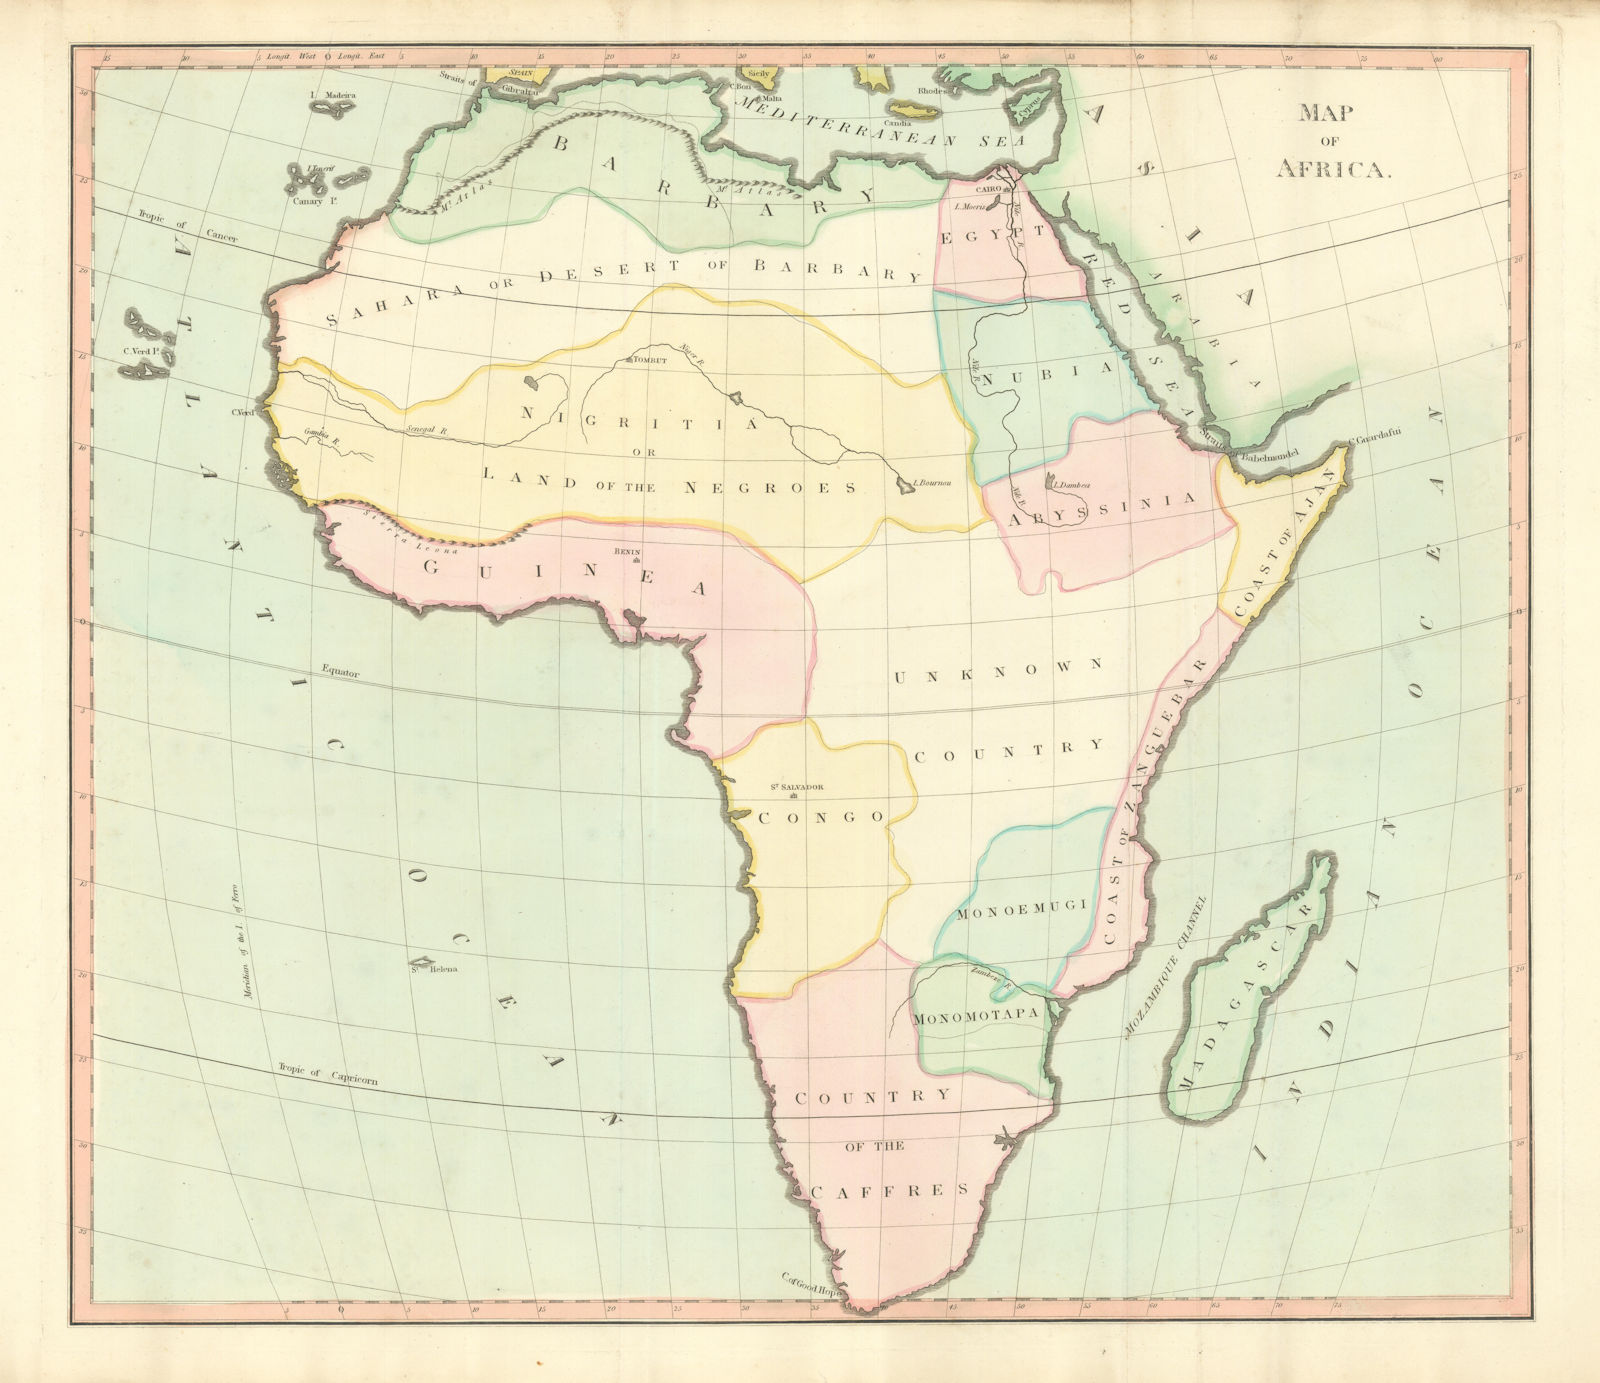 Associate Product "Map of Africa" Caffres Unknown Congo Nigritia Monoemugi Ajan. D'ANVILLE 1815